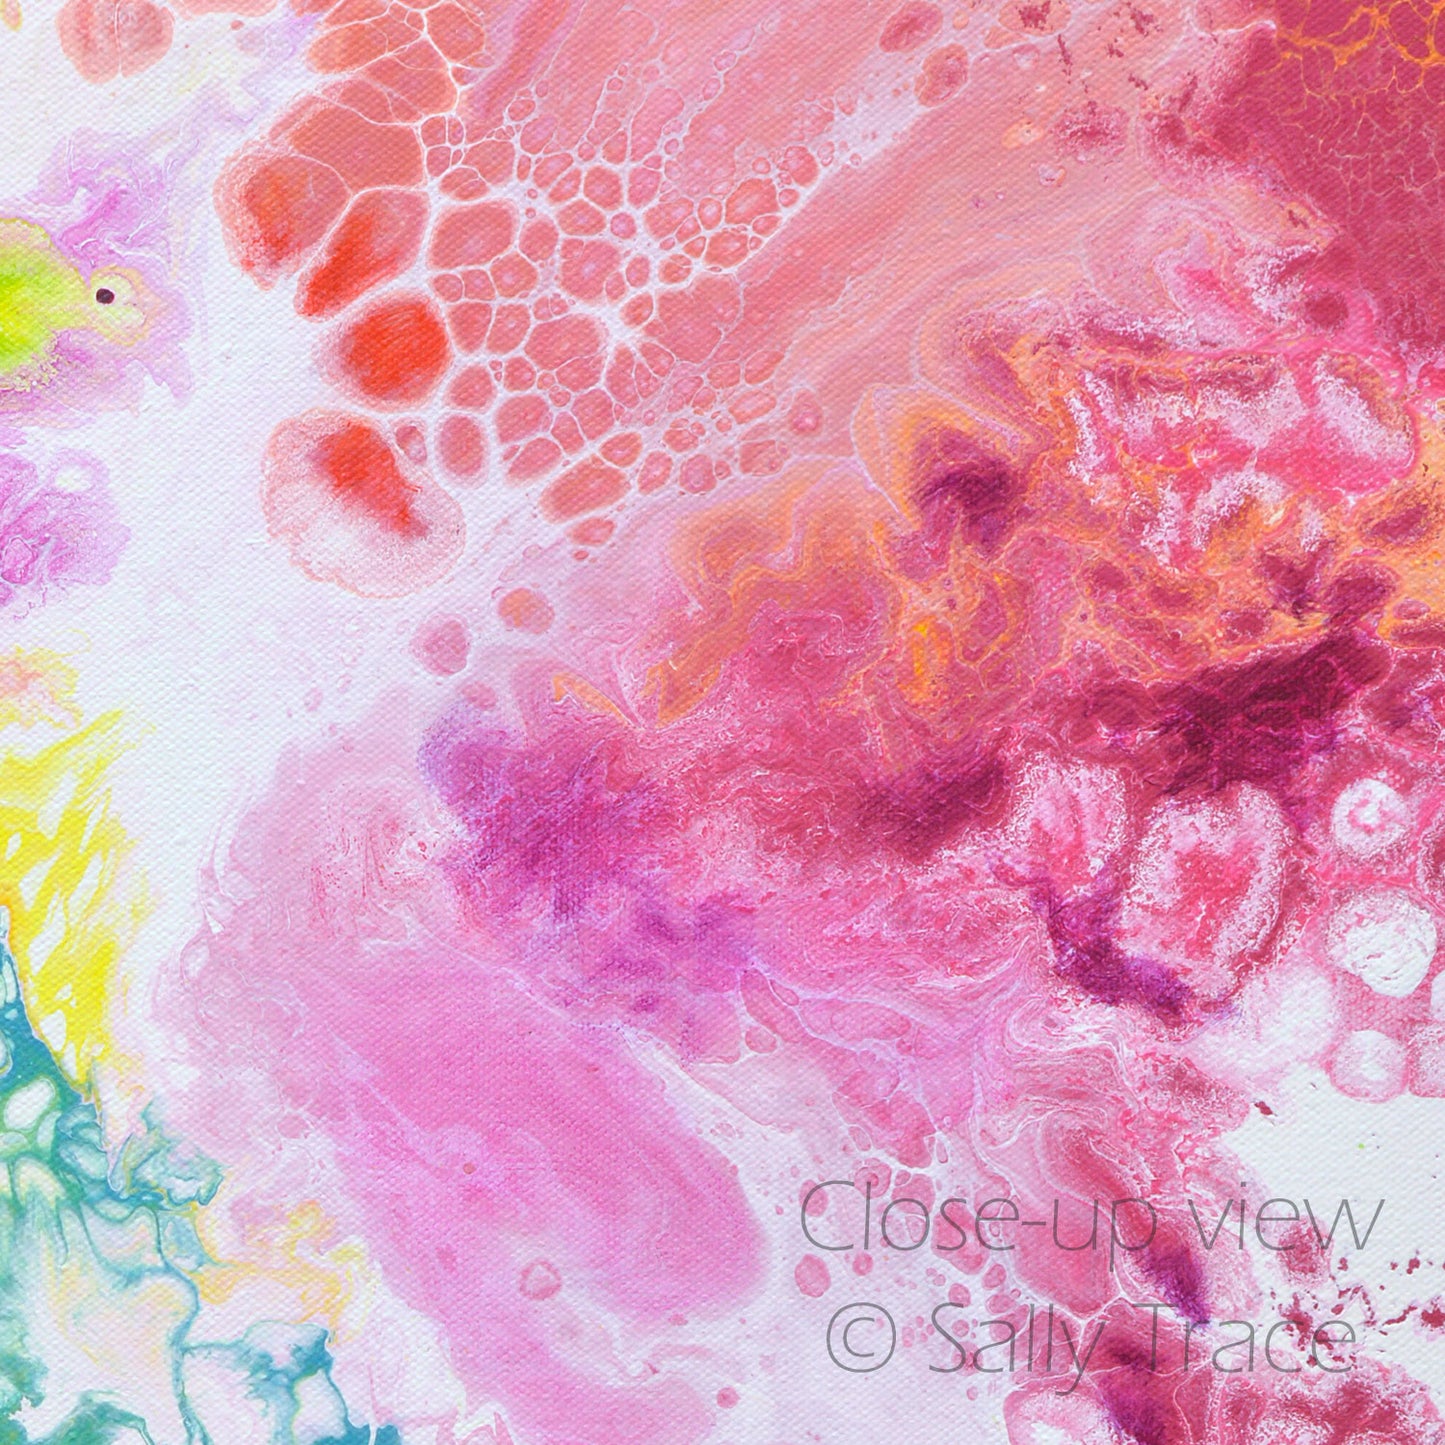 "Coming Alive," Art Prints from my Fluid Abstract Painting